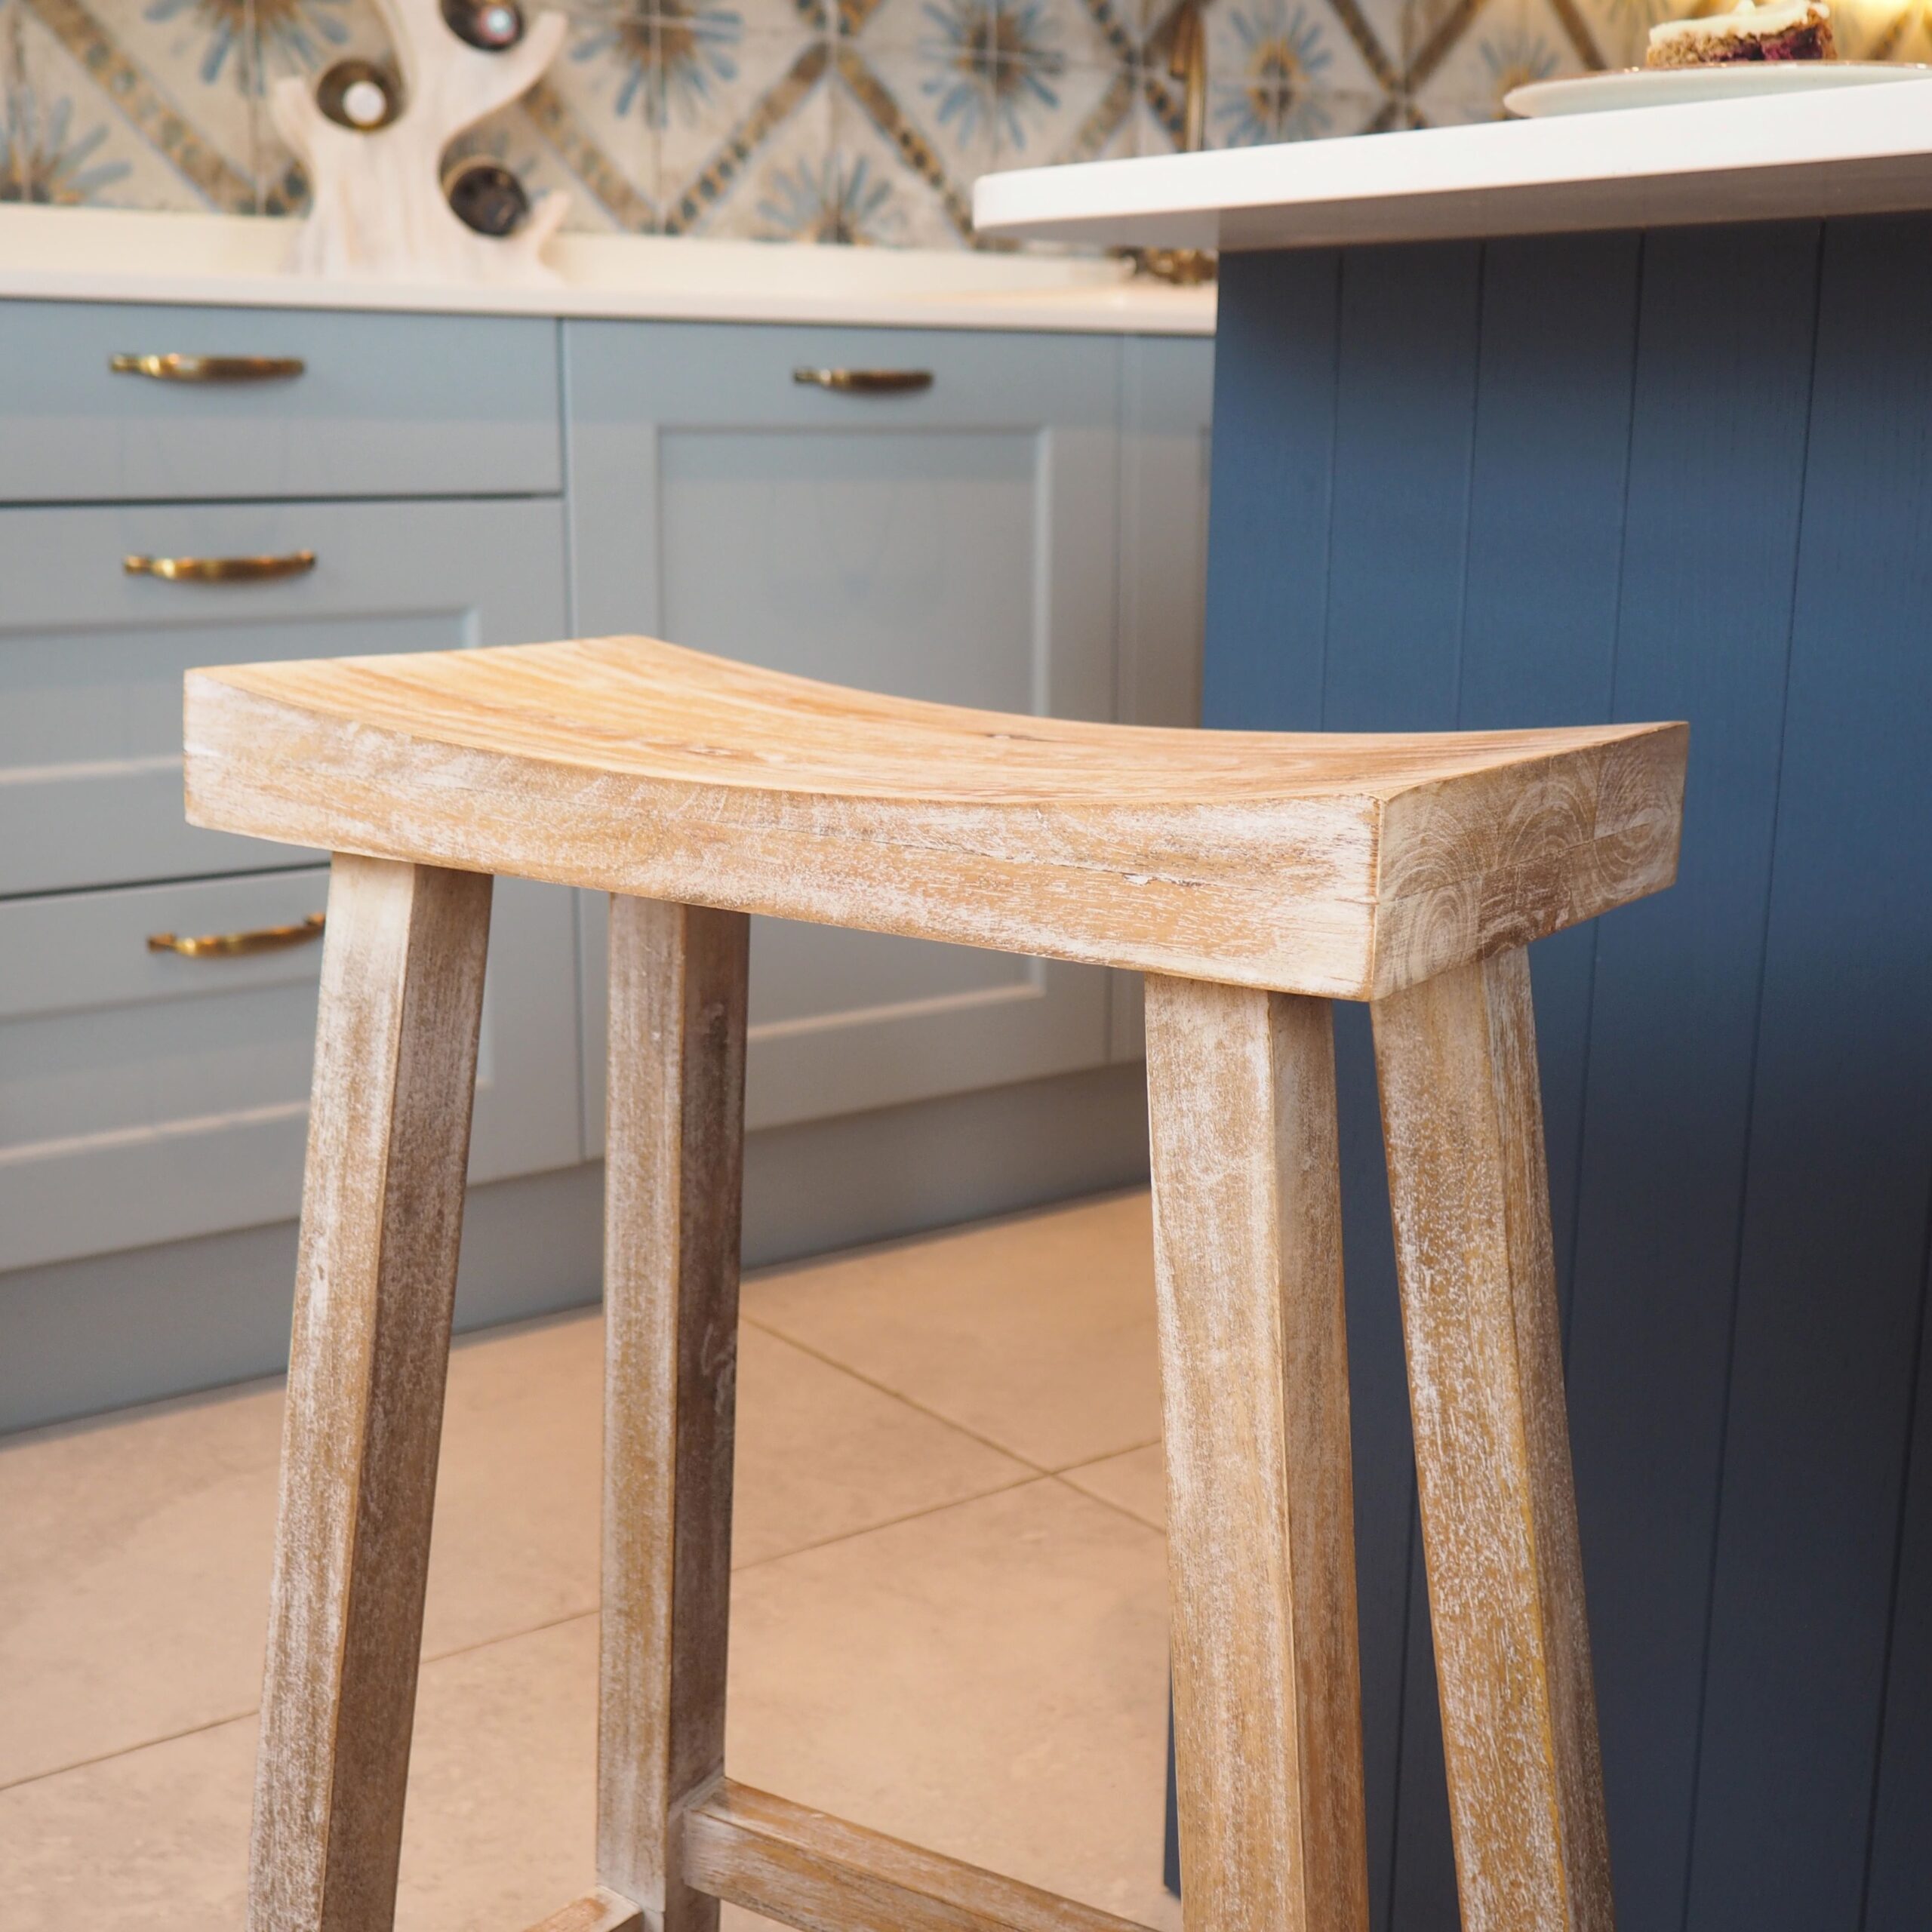 Close up of whitewashed bar stool in kitchen